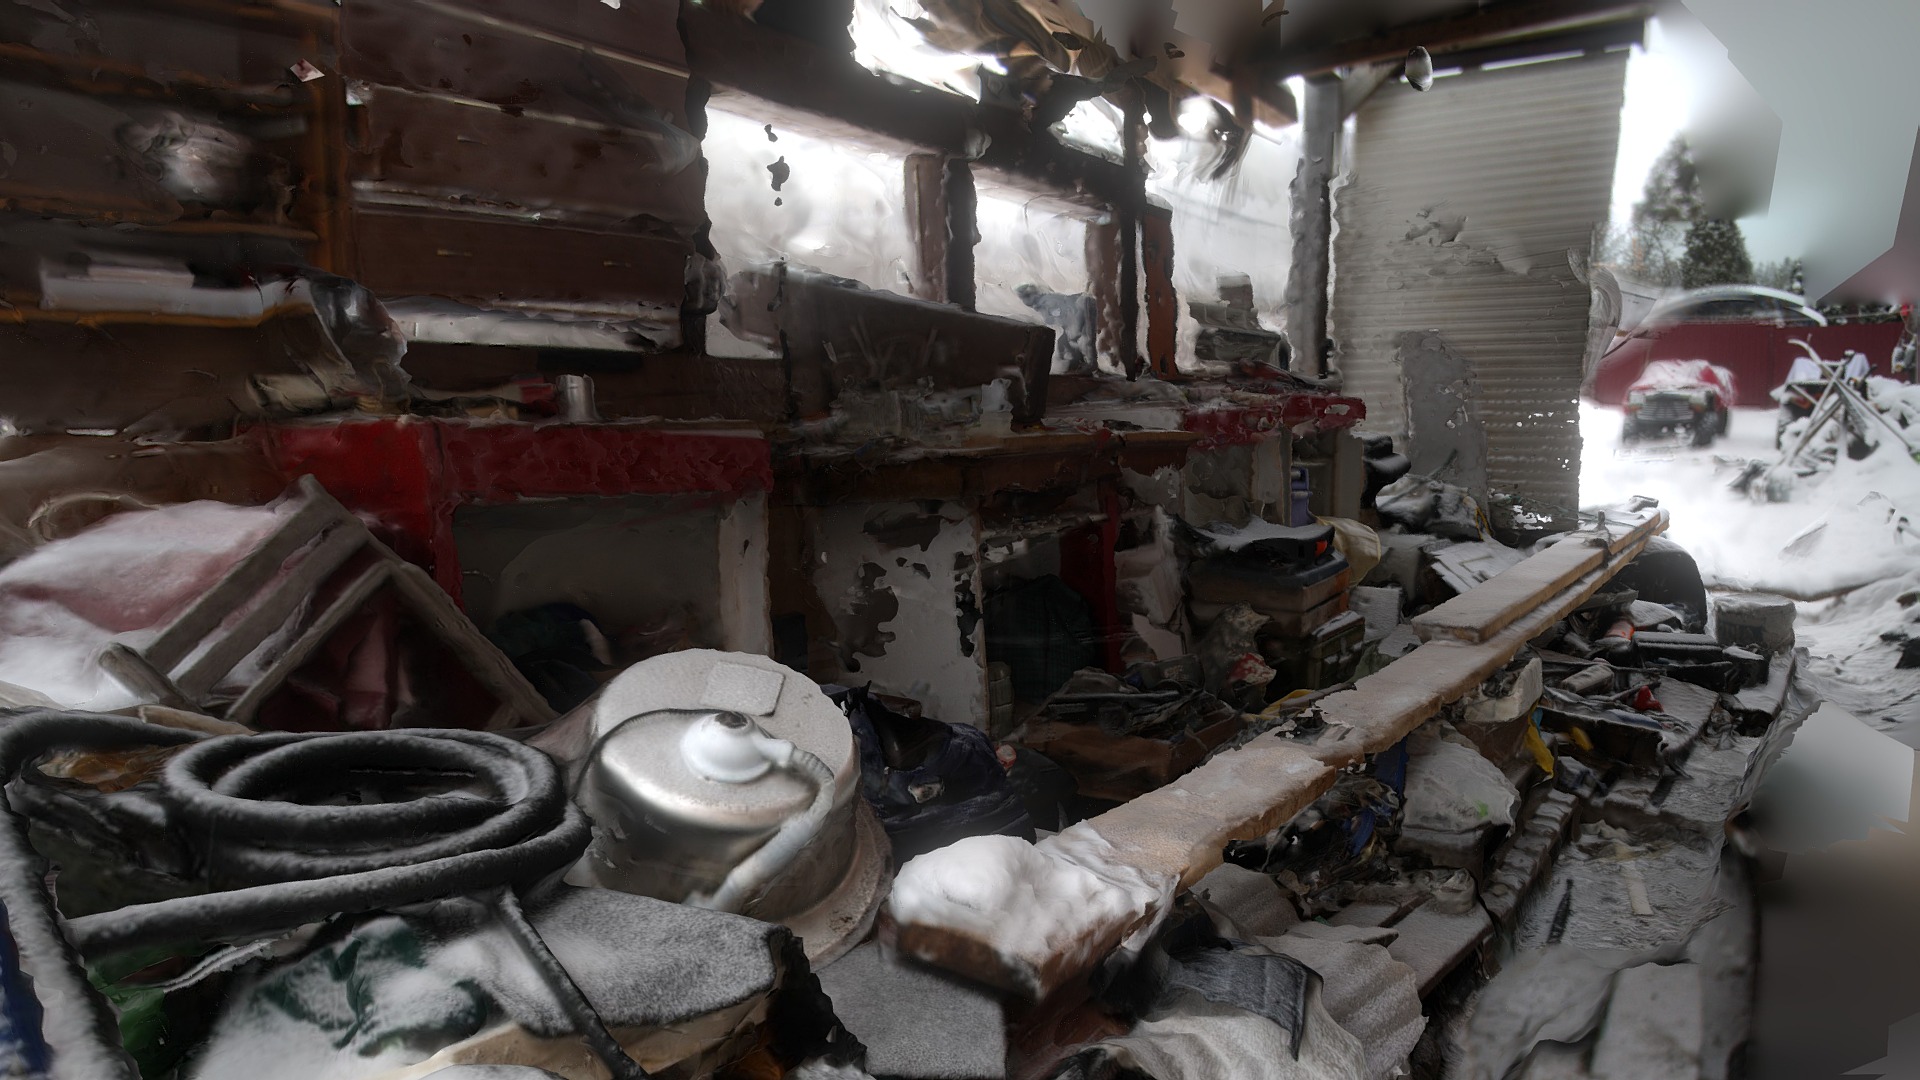 3D model winter exterior * - This is a 3D model of the winter exterior *. The 3D model is about a room is filled with junk.